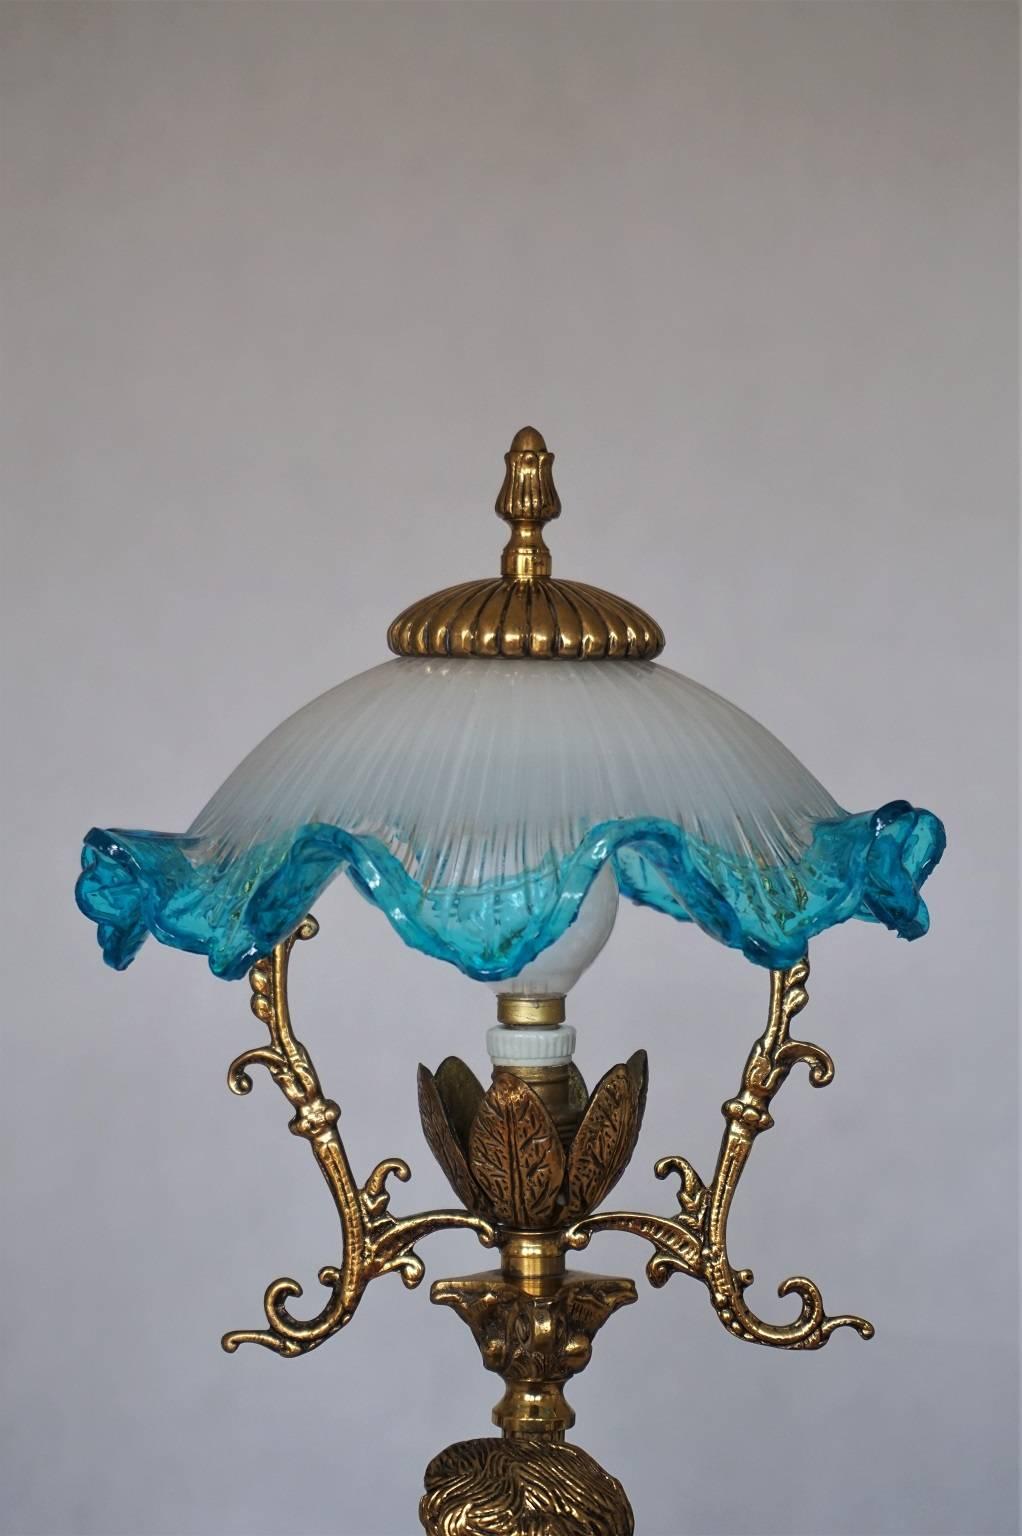 20th Century Pair of Solid Brass Cherub Table Lamps Art Nouveau Style, circa 1920